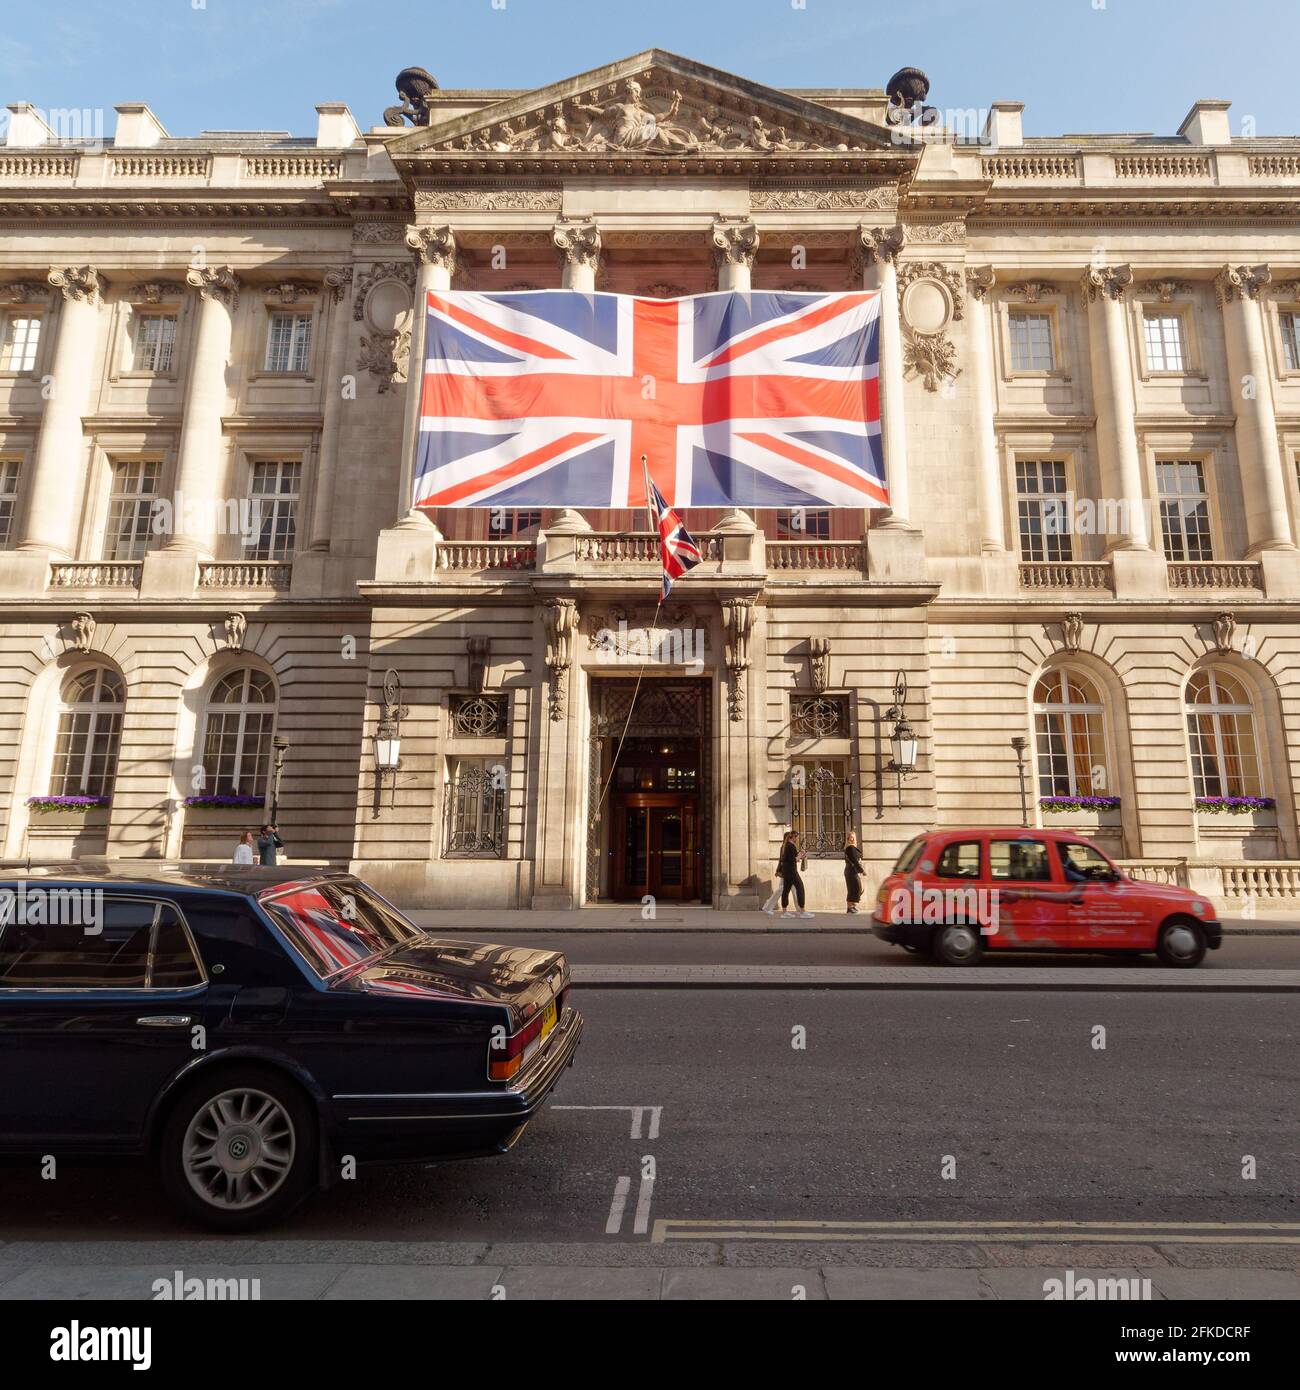 London, Greater London, England - Apr 24 2021: Union Jack on display in Pall Mall reflecting in the rear window of a car as a red Taxi passes by. Stock Photo